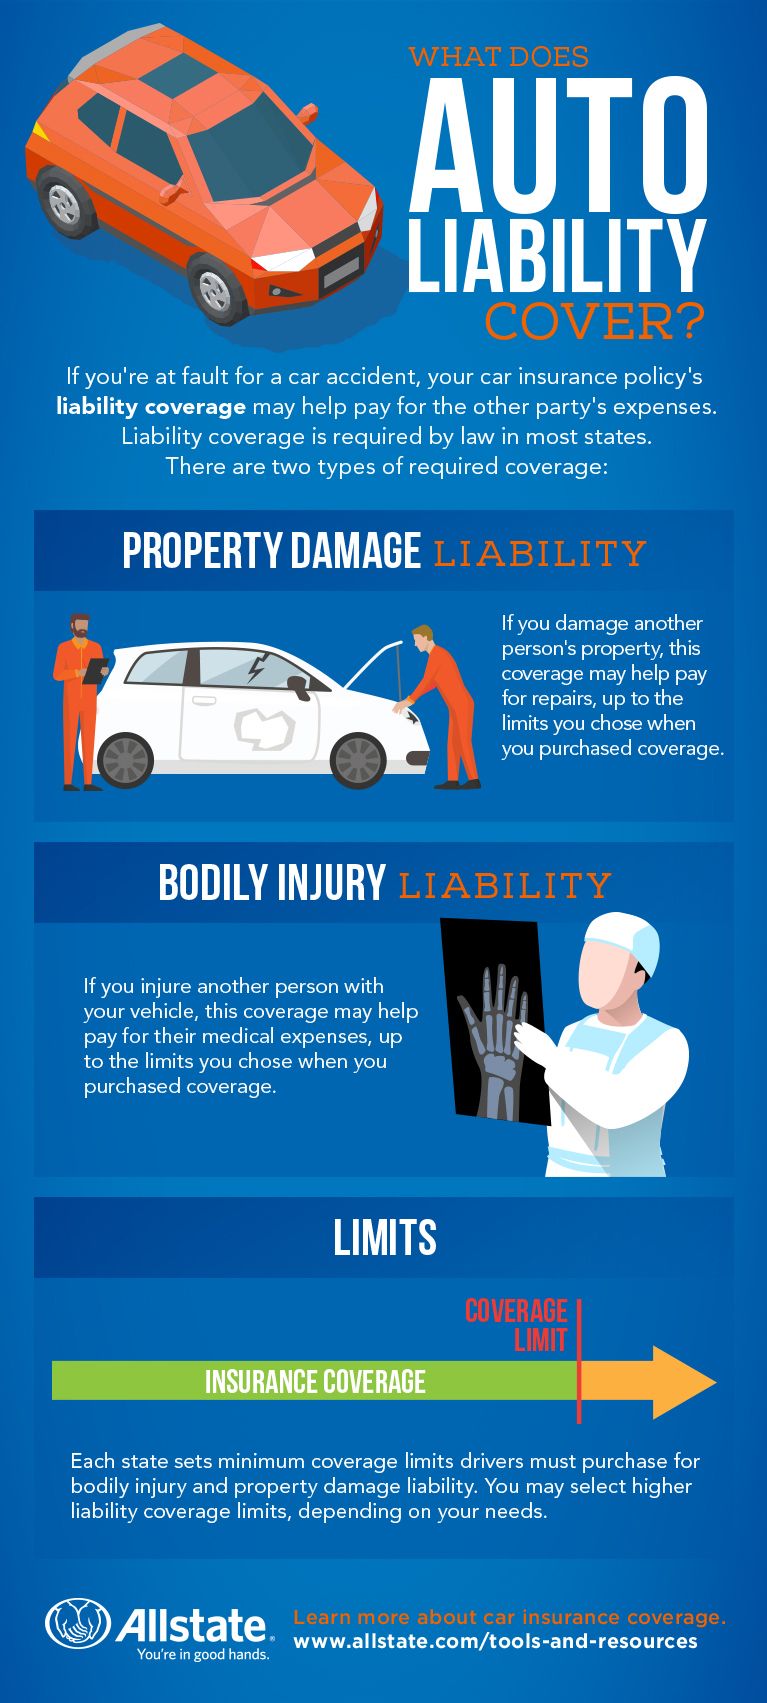 One of the most basic types of auto insurance coverage, liability is